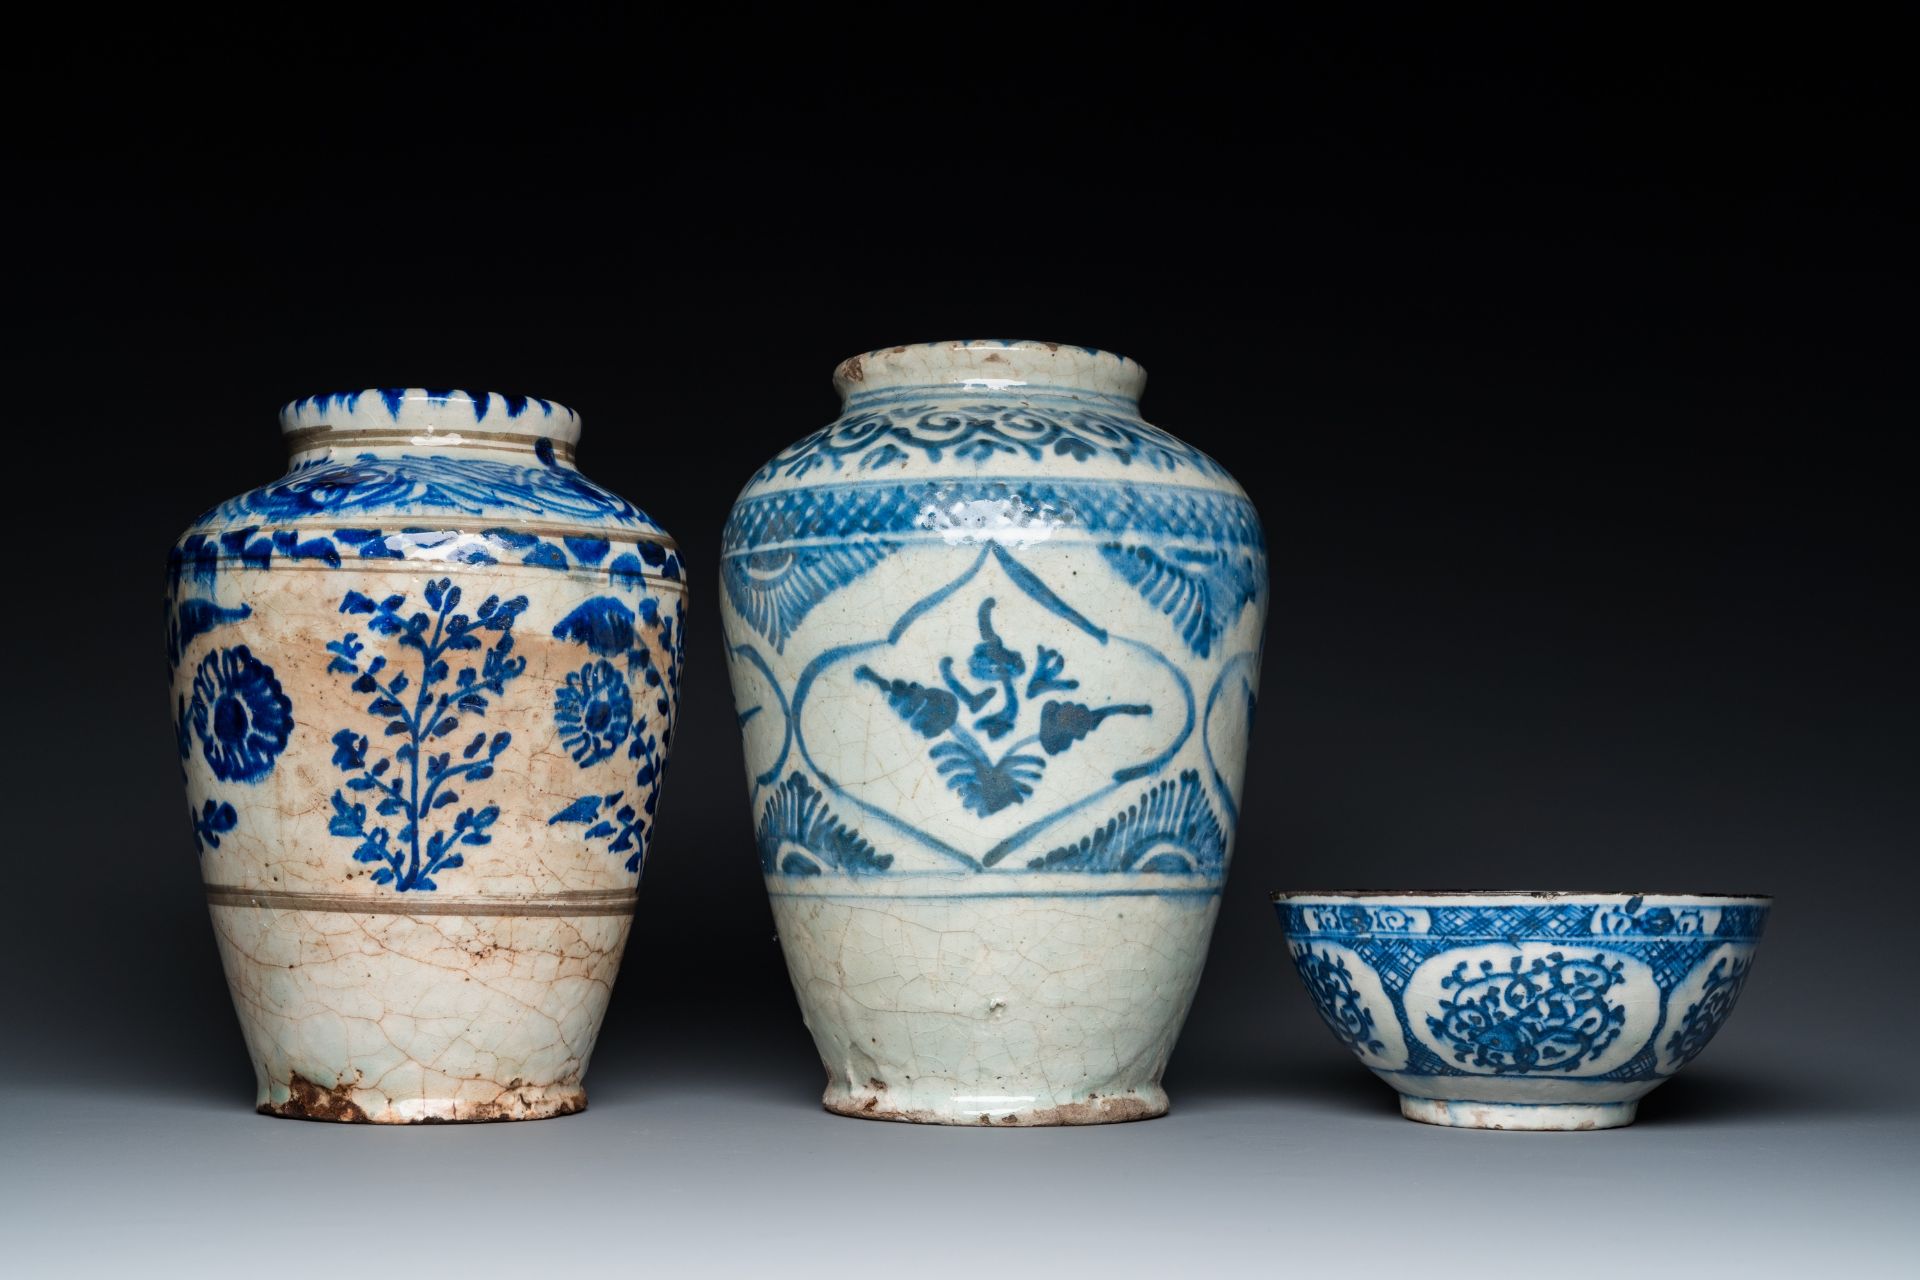 Two blue and white Islamic pottery storage jars and a bowl, Persia, 17/19th C. - Image 3 of 7